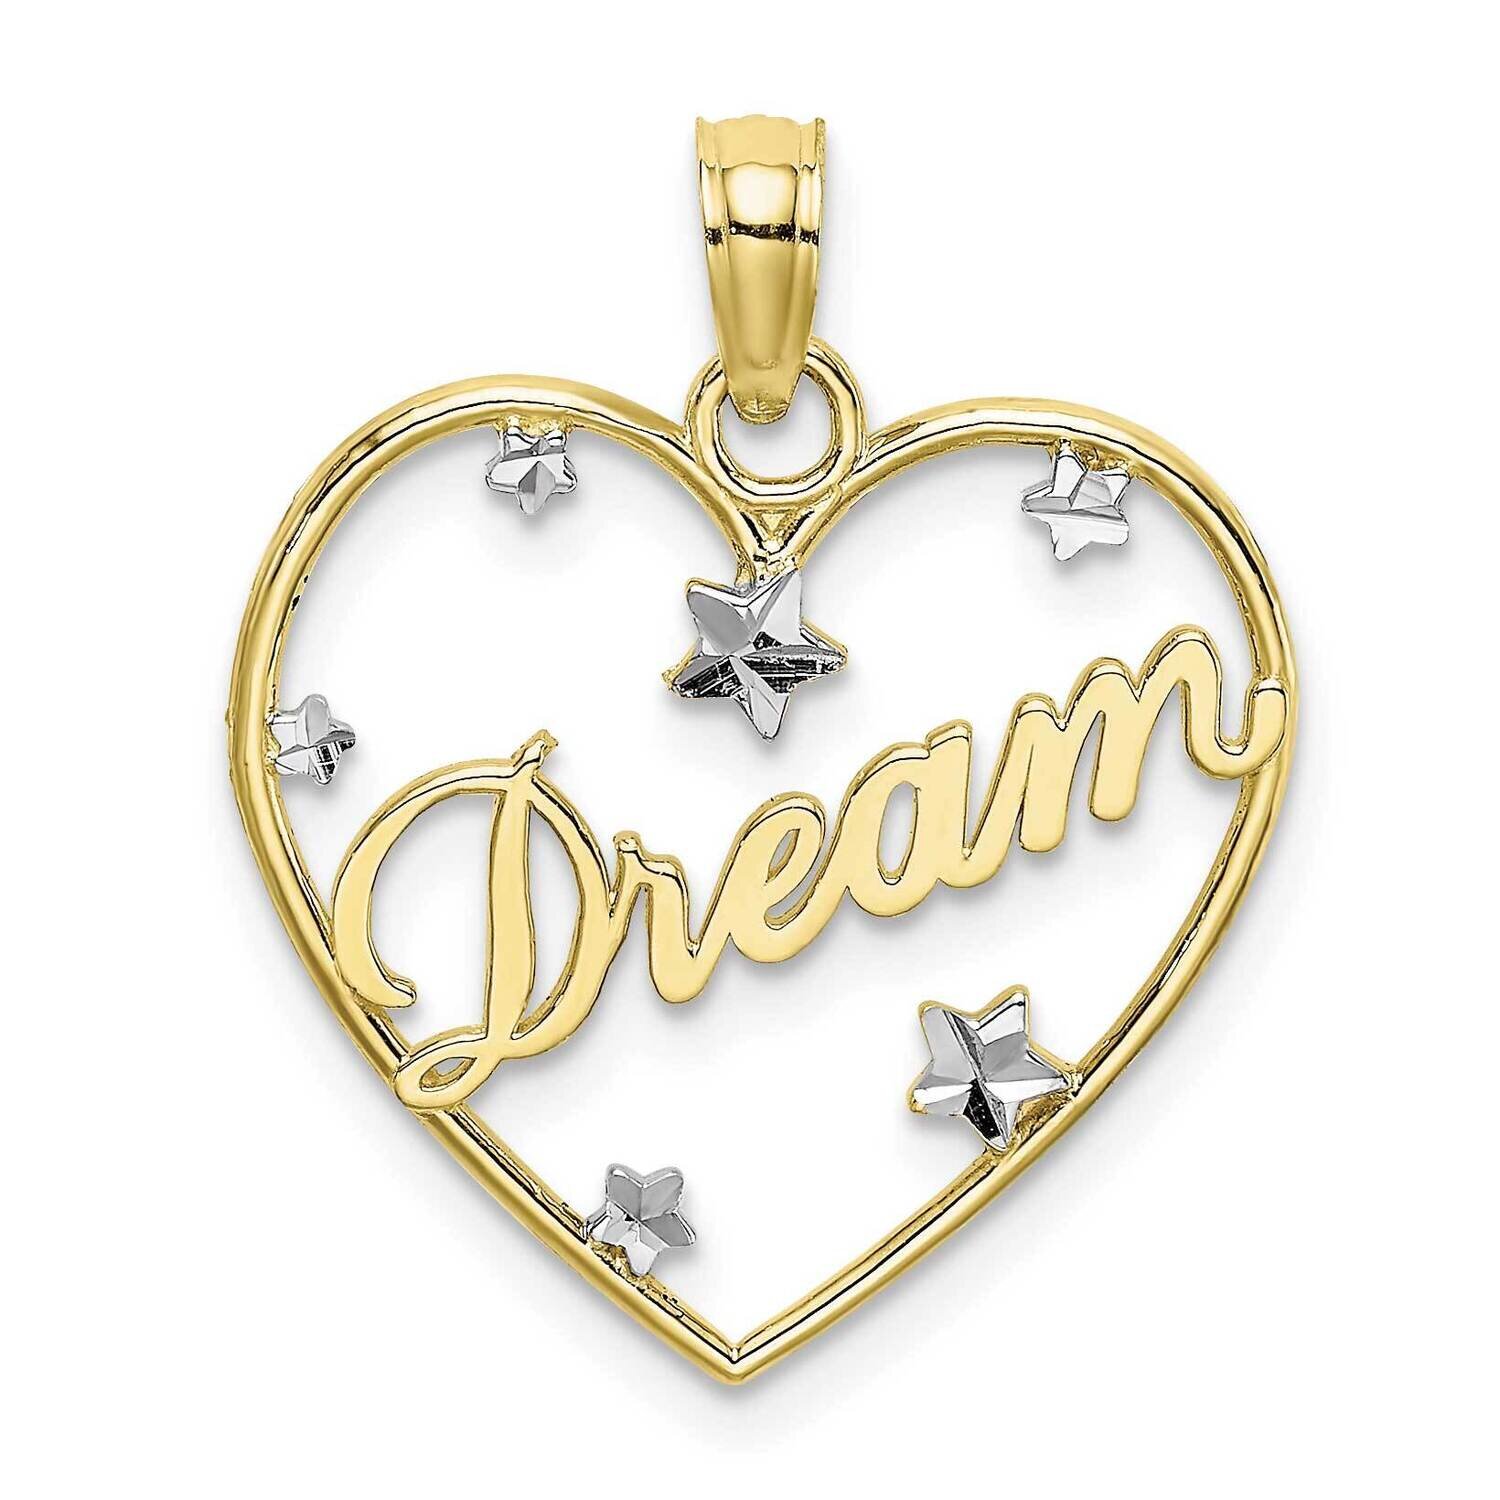 Dream In Heart Frame with Rh Star Accents Charm 10k Gold Diamond-cut 10K9396